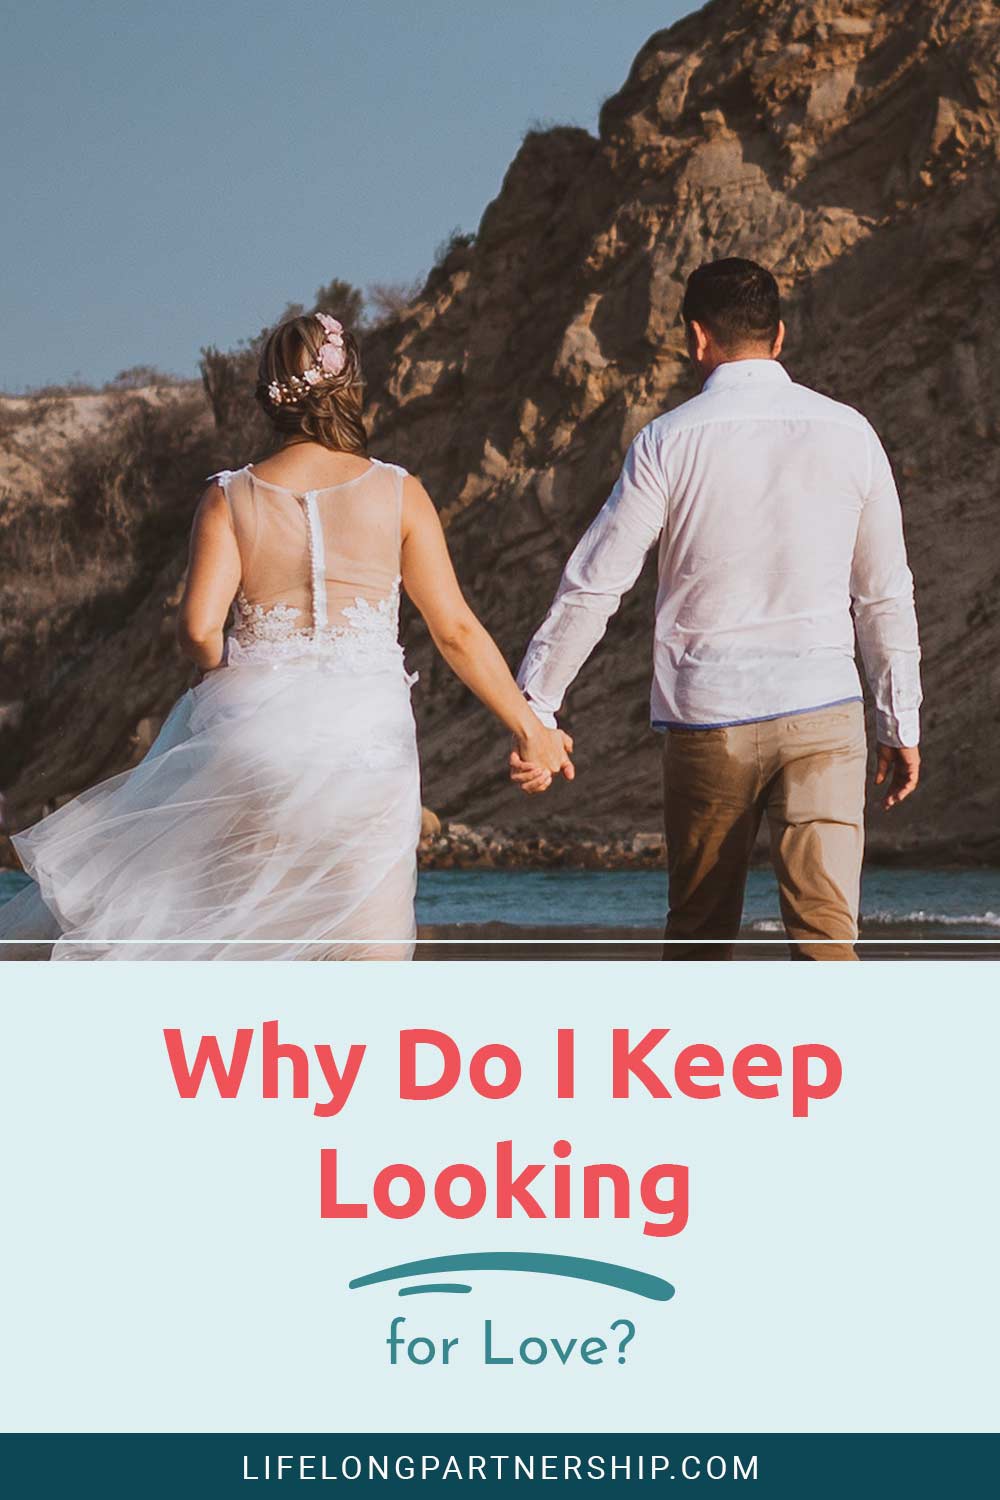 Why Do I Keep Looking for Love?